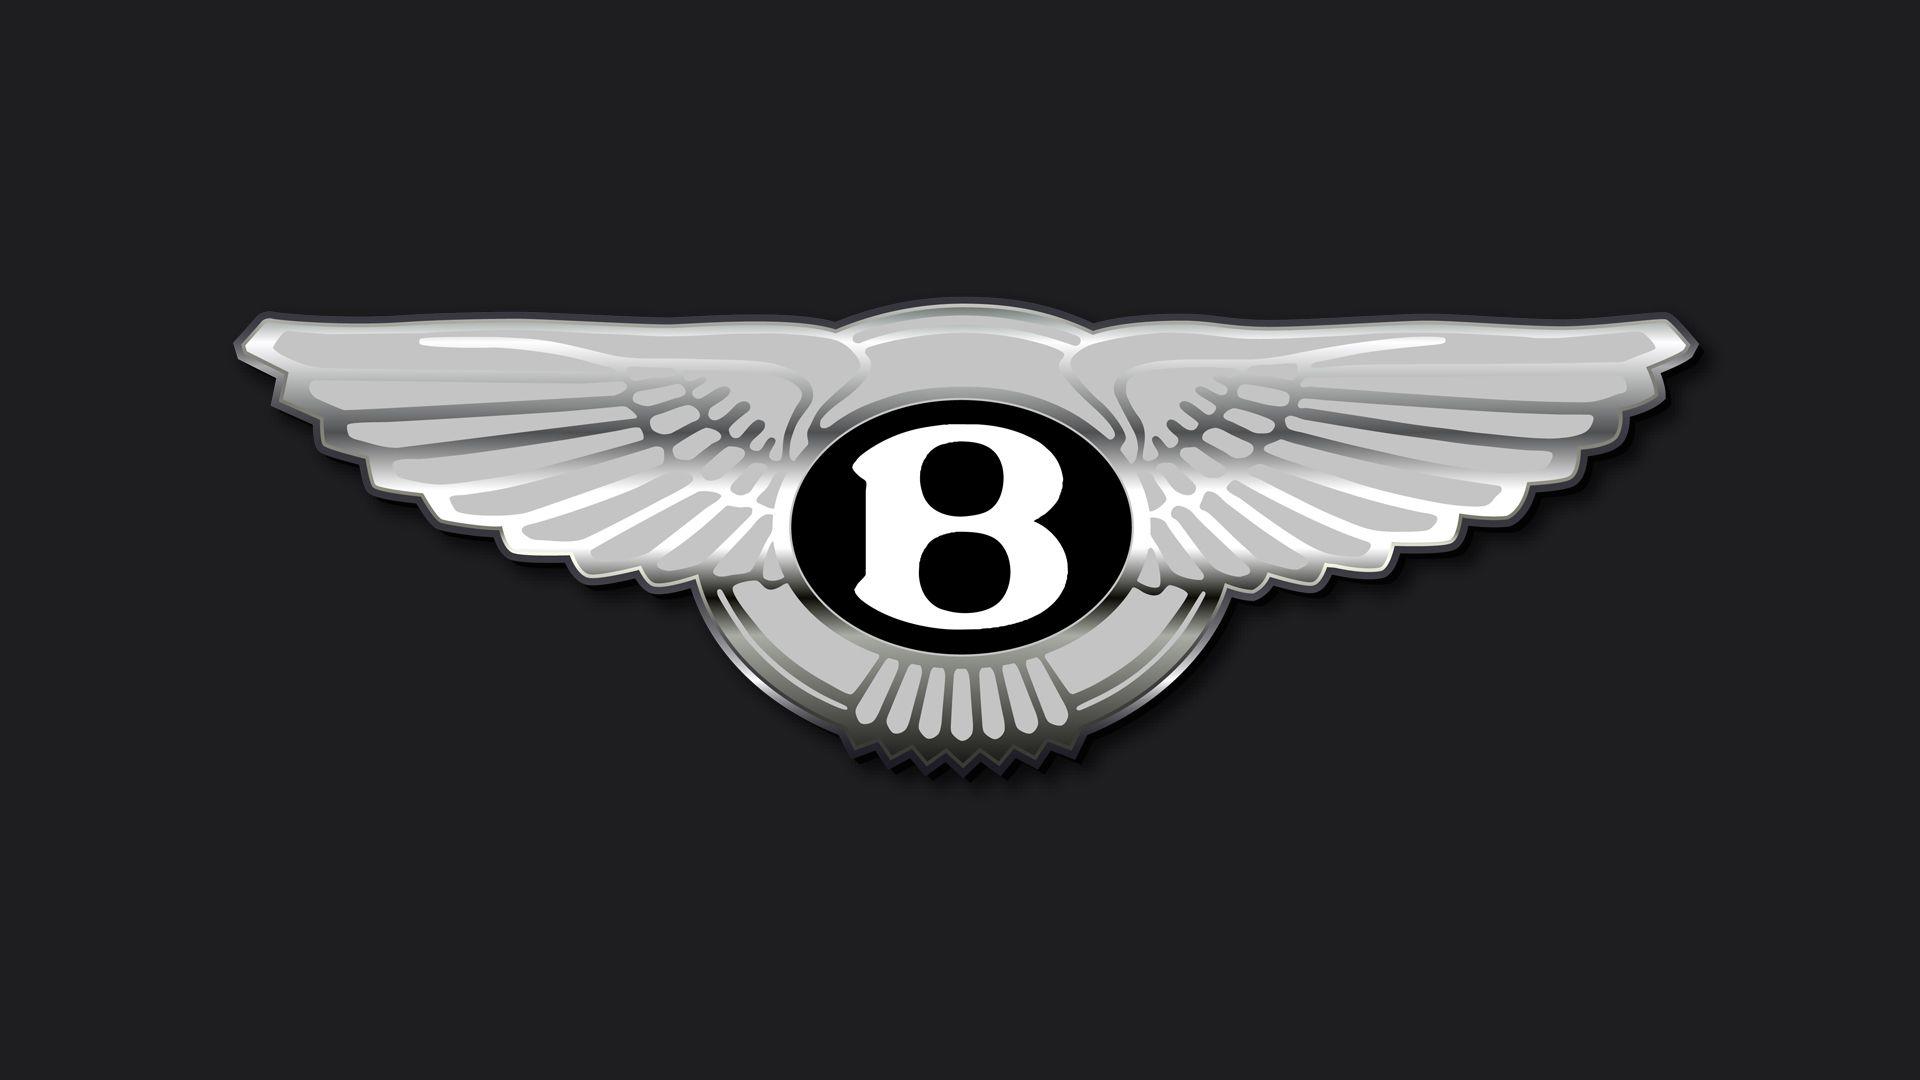 Bentley Logo - Bentley Logo, Bentley Symbol, Meaning, History and Evolution